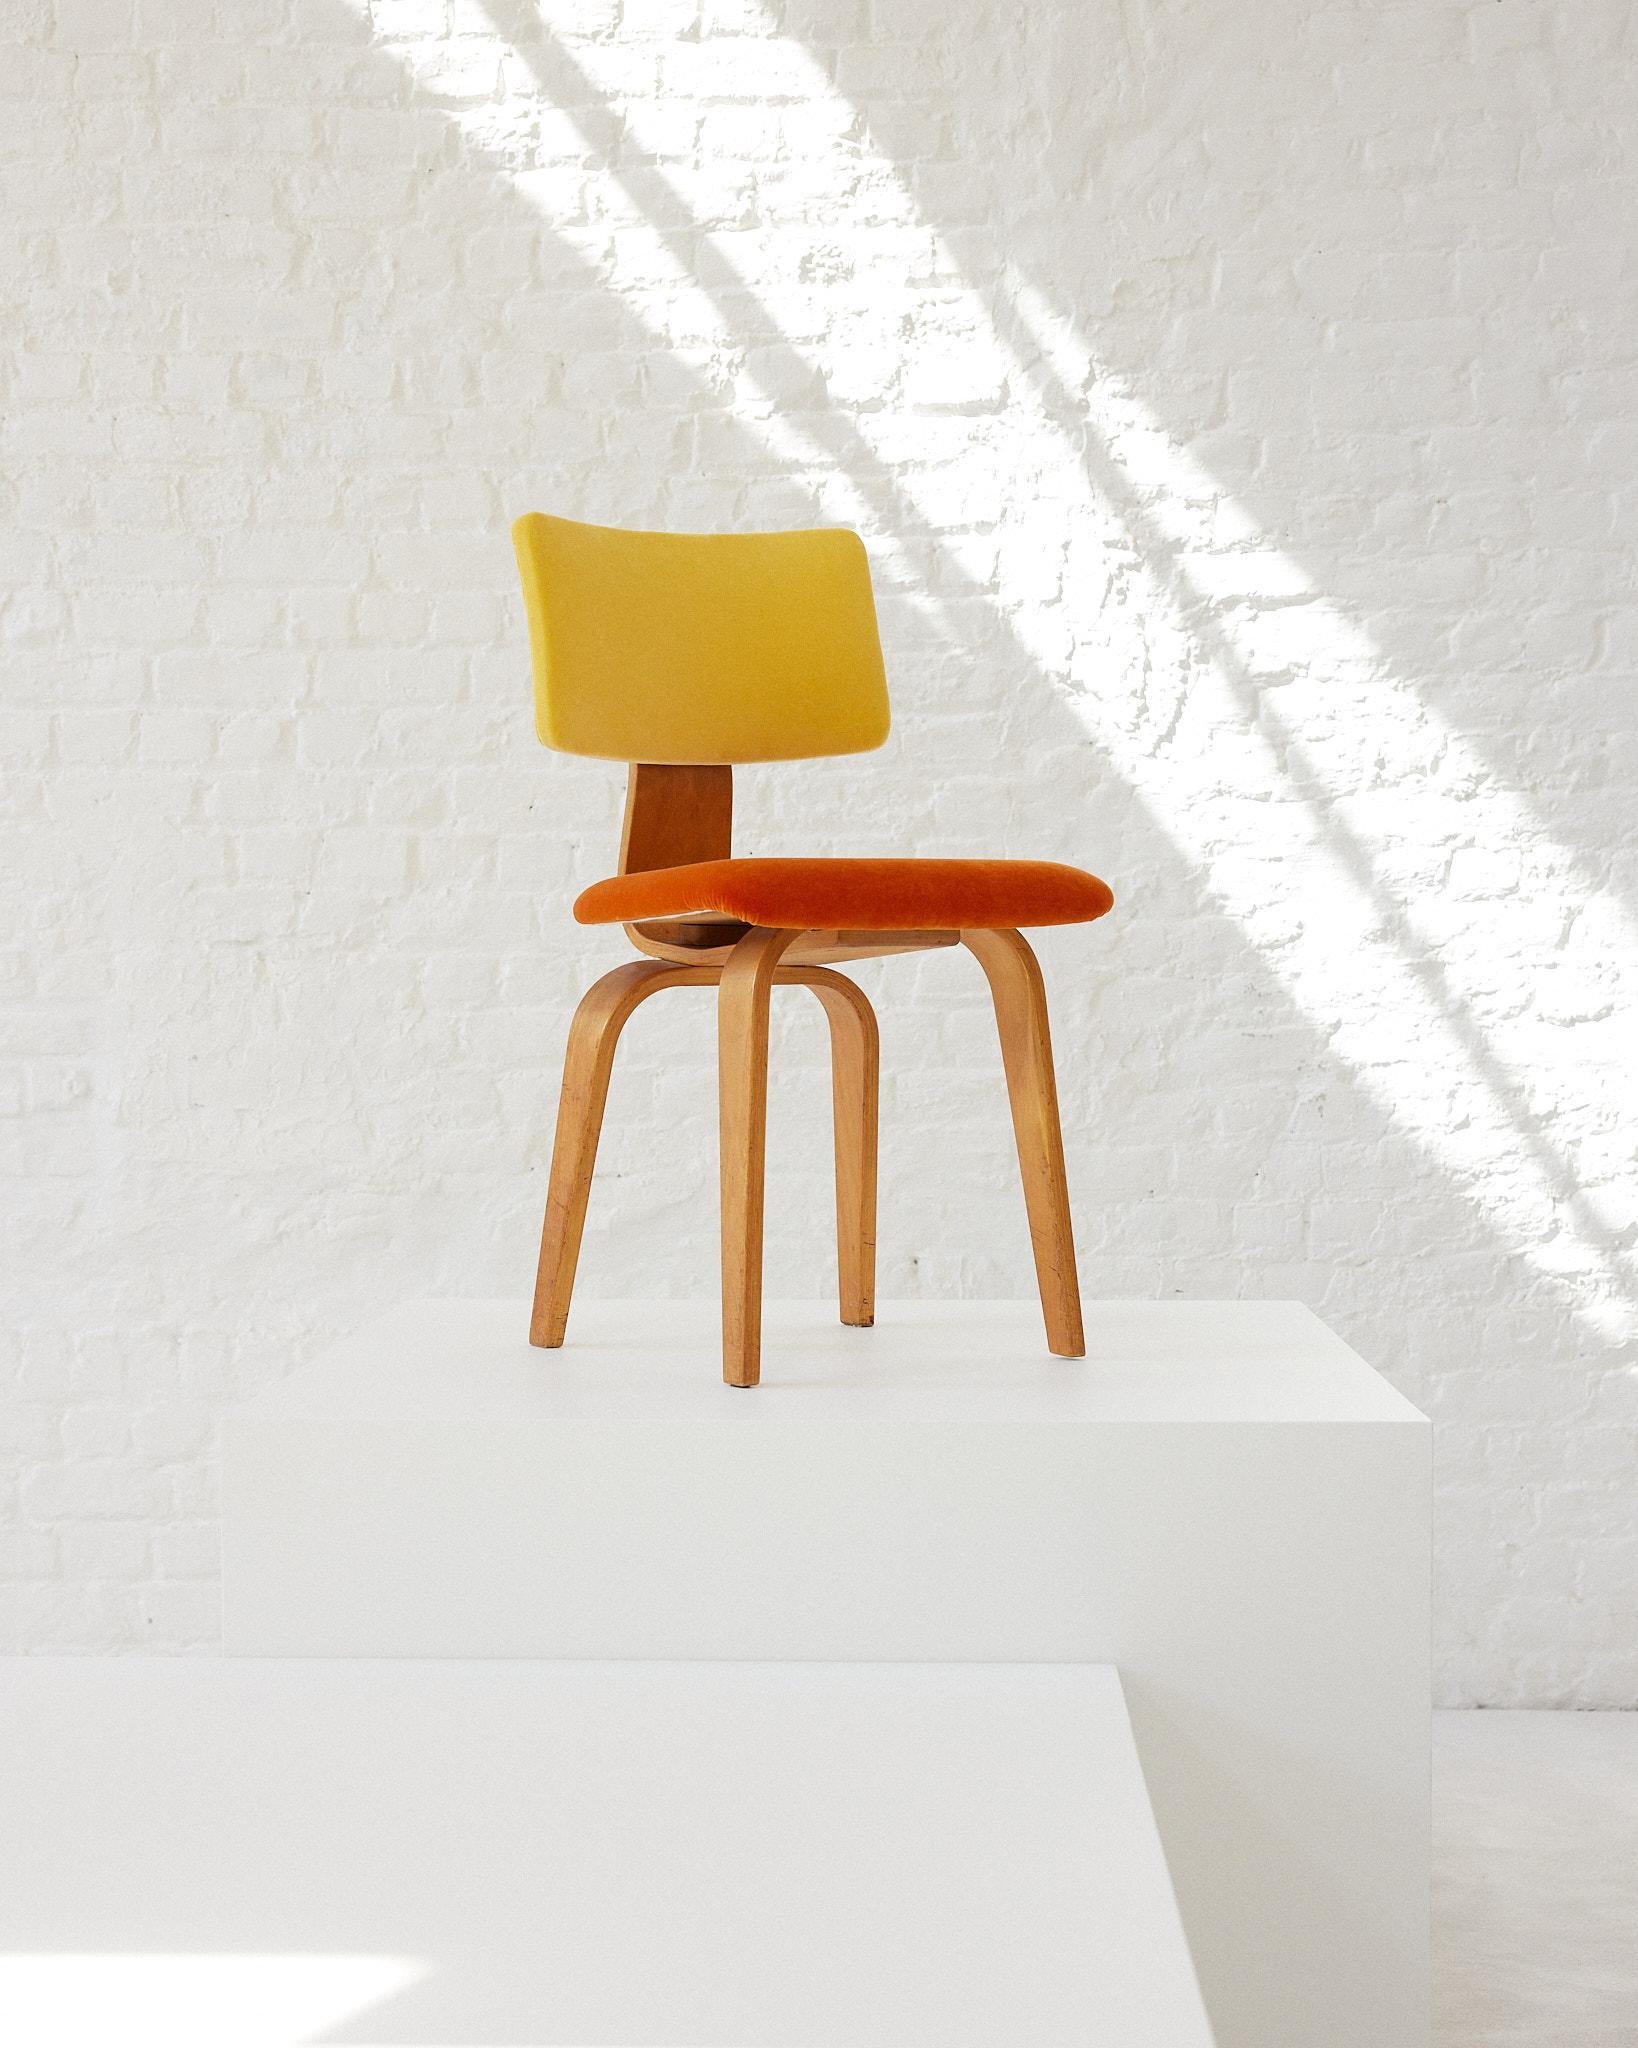 The SB 02 chair was designed in 1952 by Cees Braakman, a Dutch designer. The chair is a result of learning new methods in bent plywood once he travelled to the US. This piece is made from birch plywood, covered with a velvet material cushion.